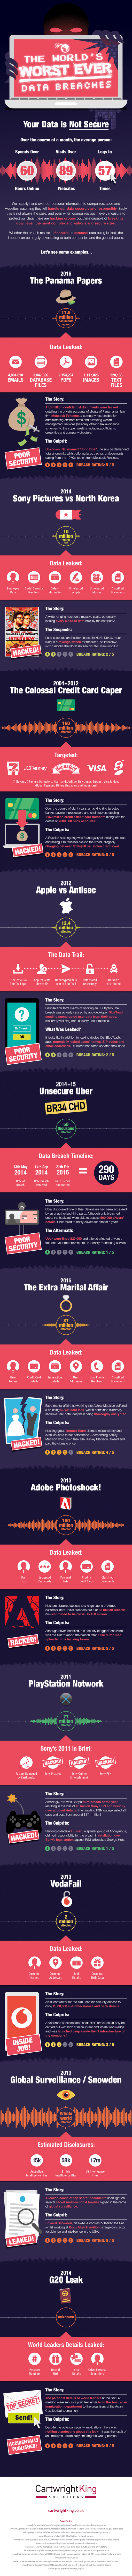 The World's Worst Ever Data Breaches - #infographic